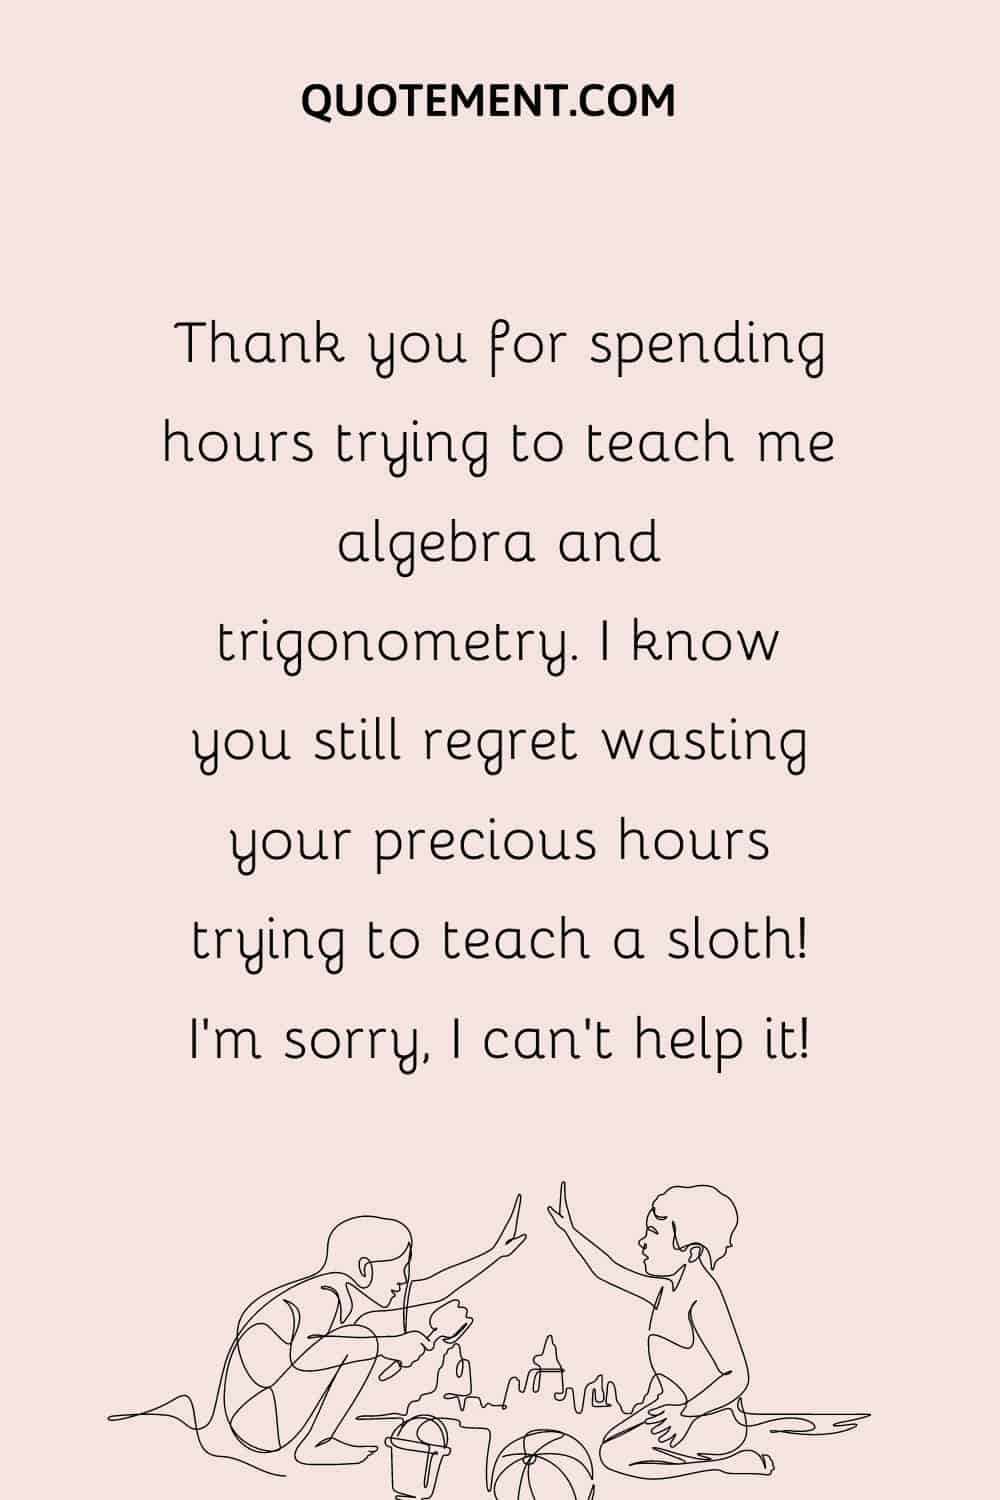 Thank you for spending hours trying to teach me algebra and trigonometry. I know you still regret wasting your precious hours trying to teach a sloth! I’m sorry, I can’t help it!